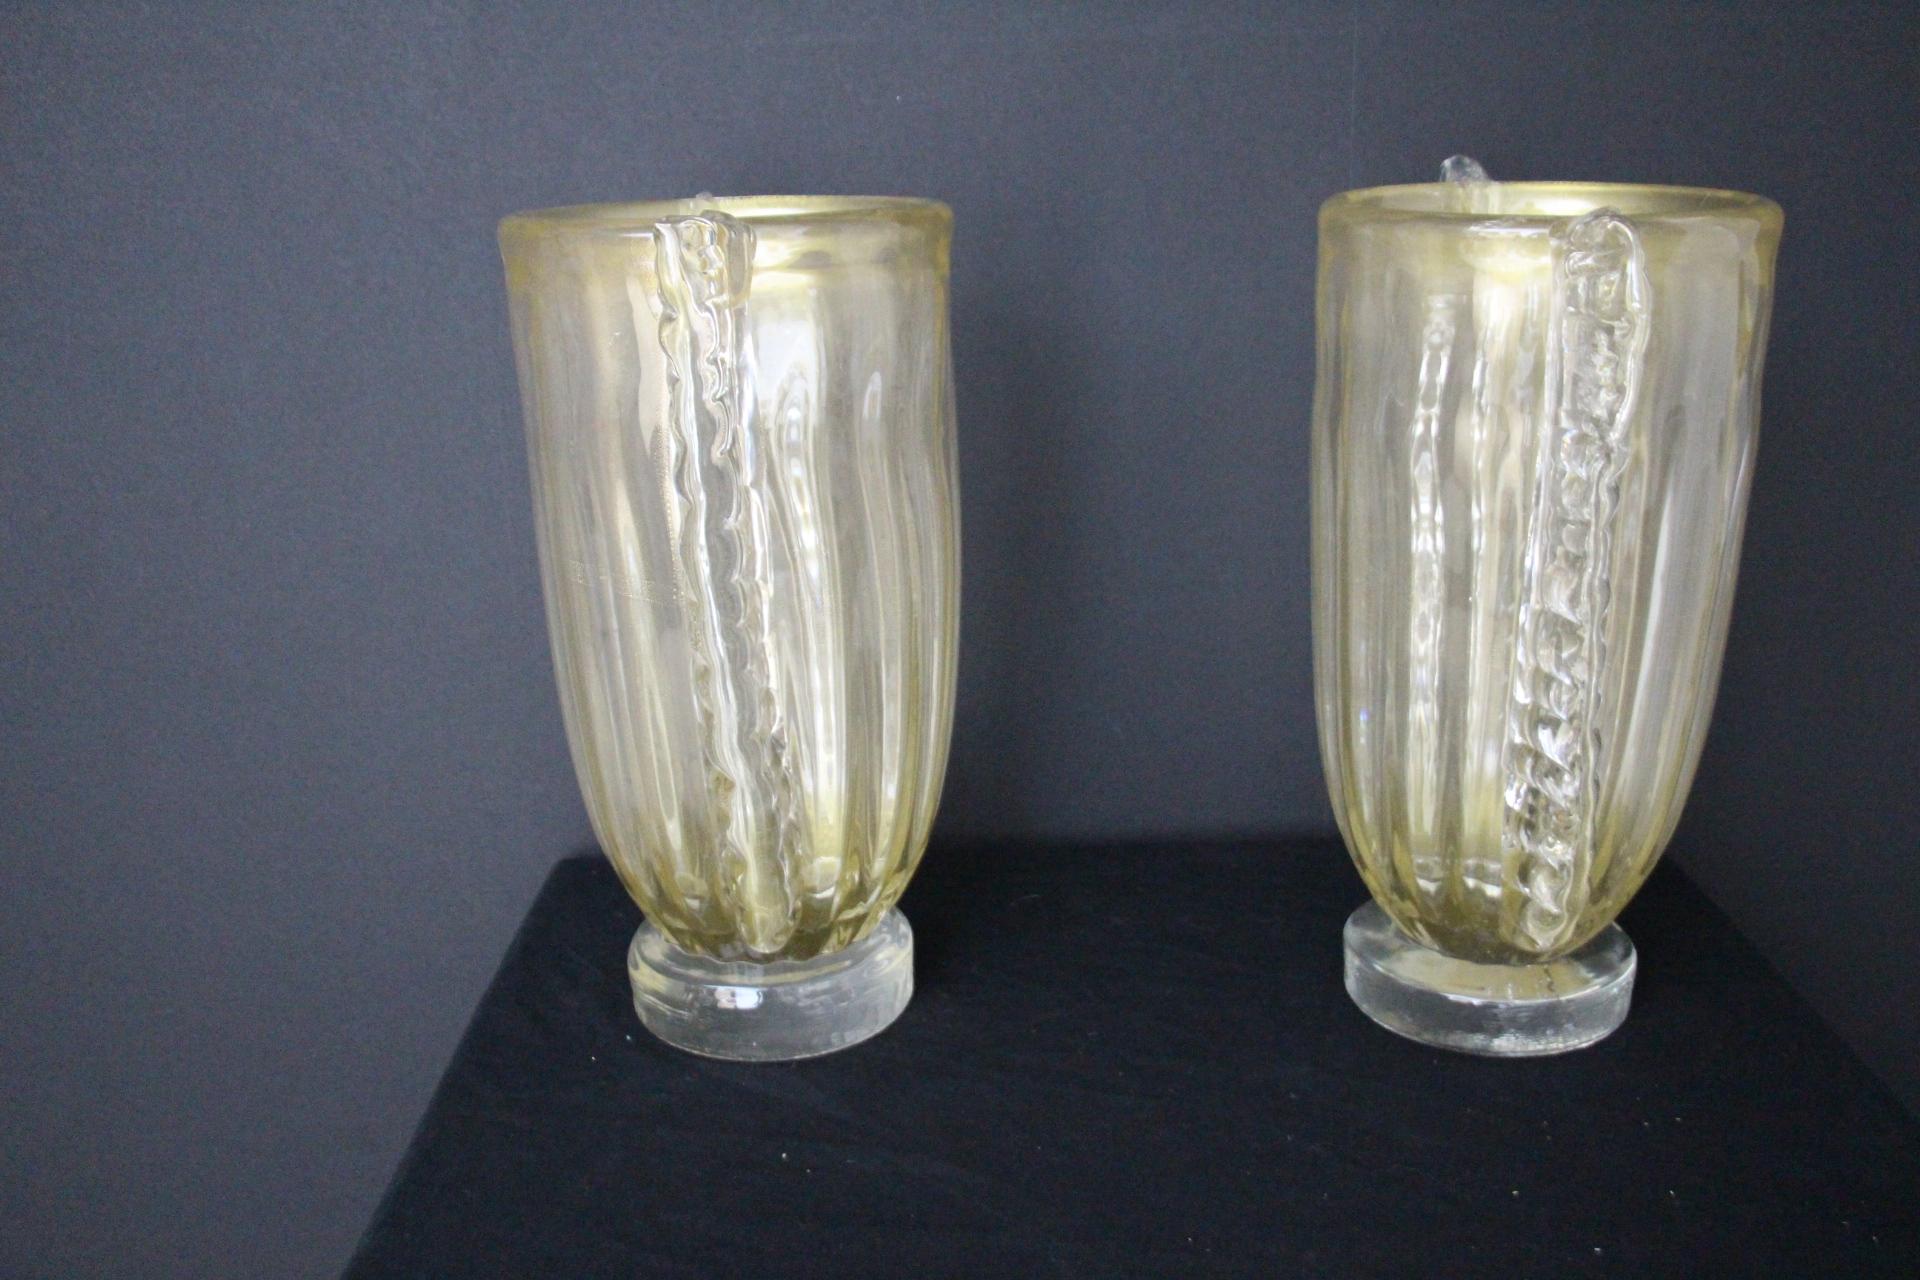 Italian Pair of Large Golden And Crystal Color Murano Glass Vases by Costantini For Sale